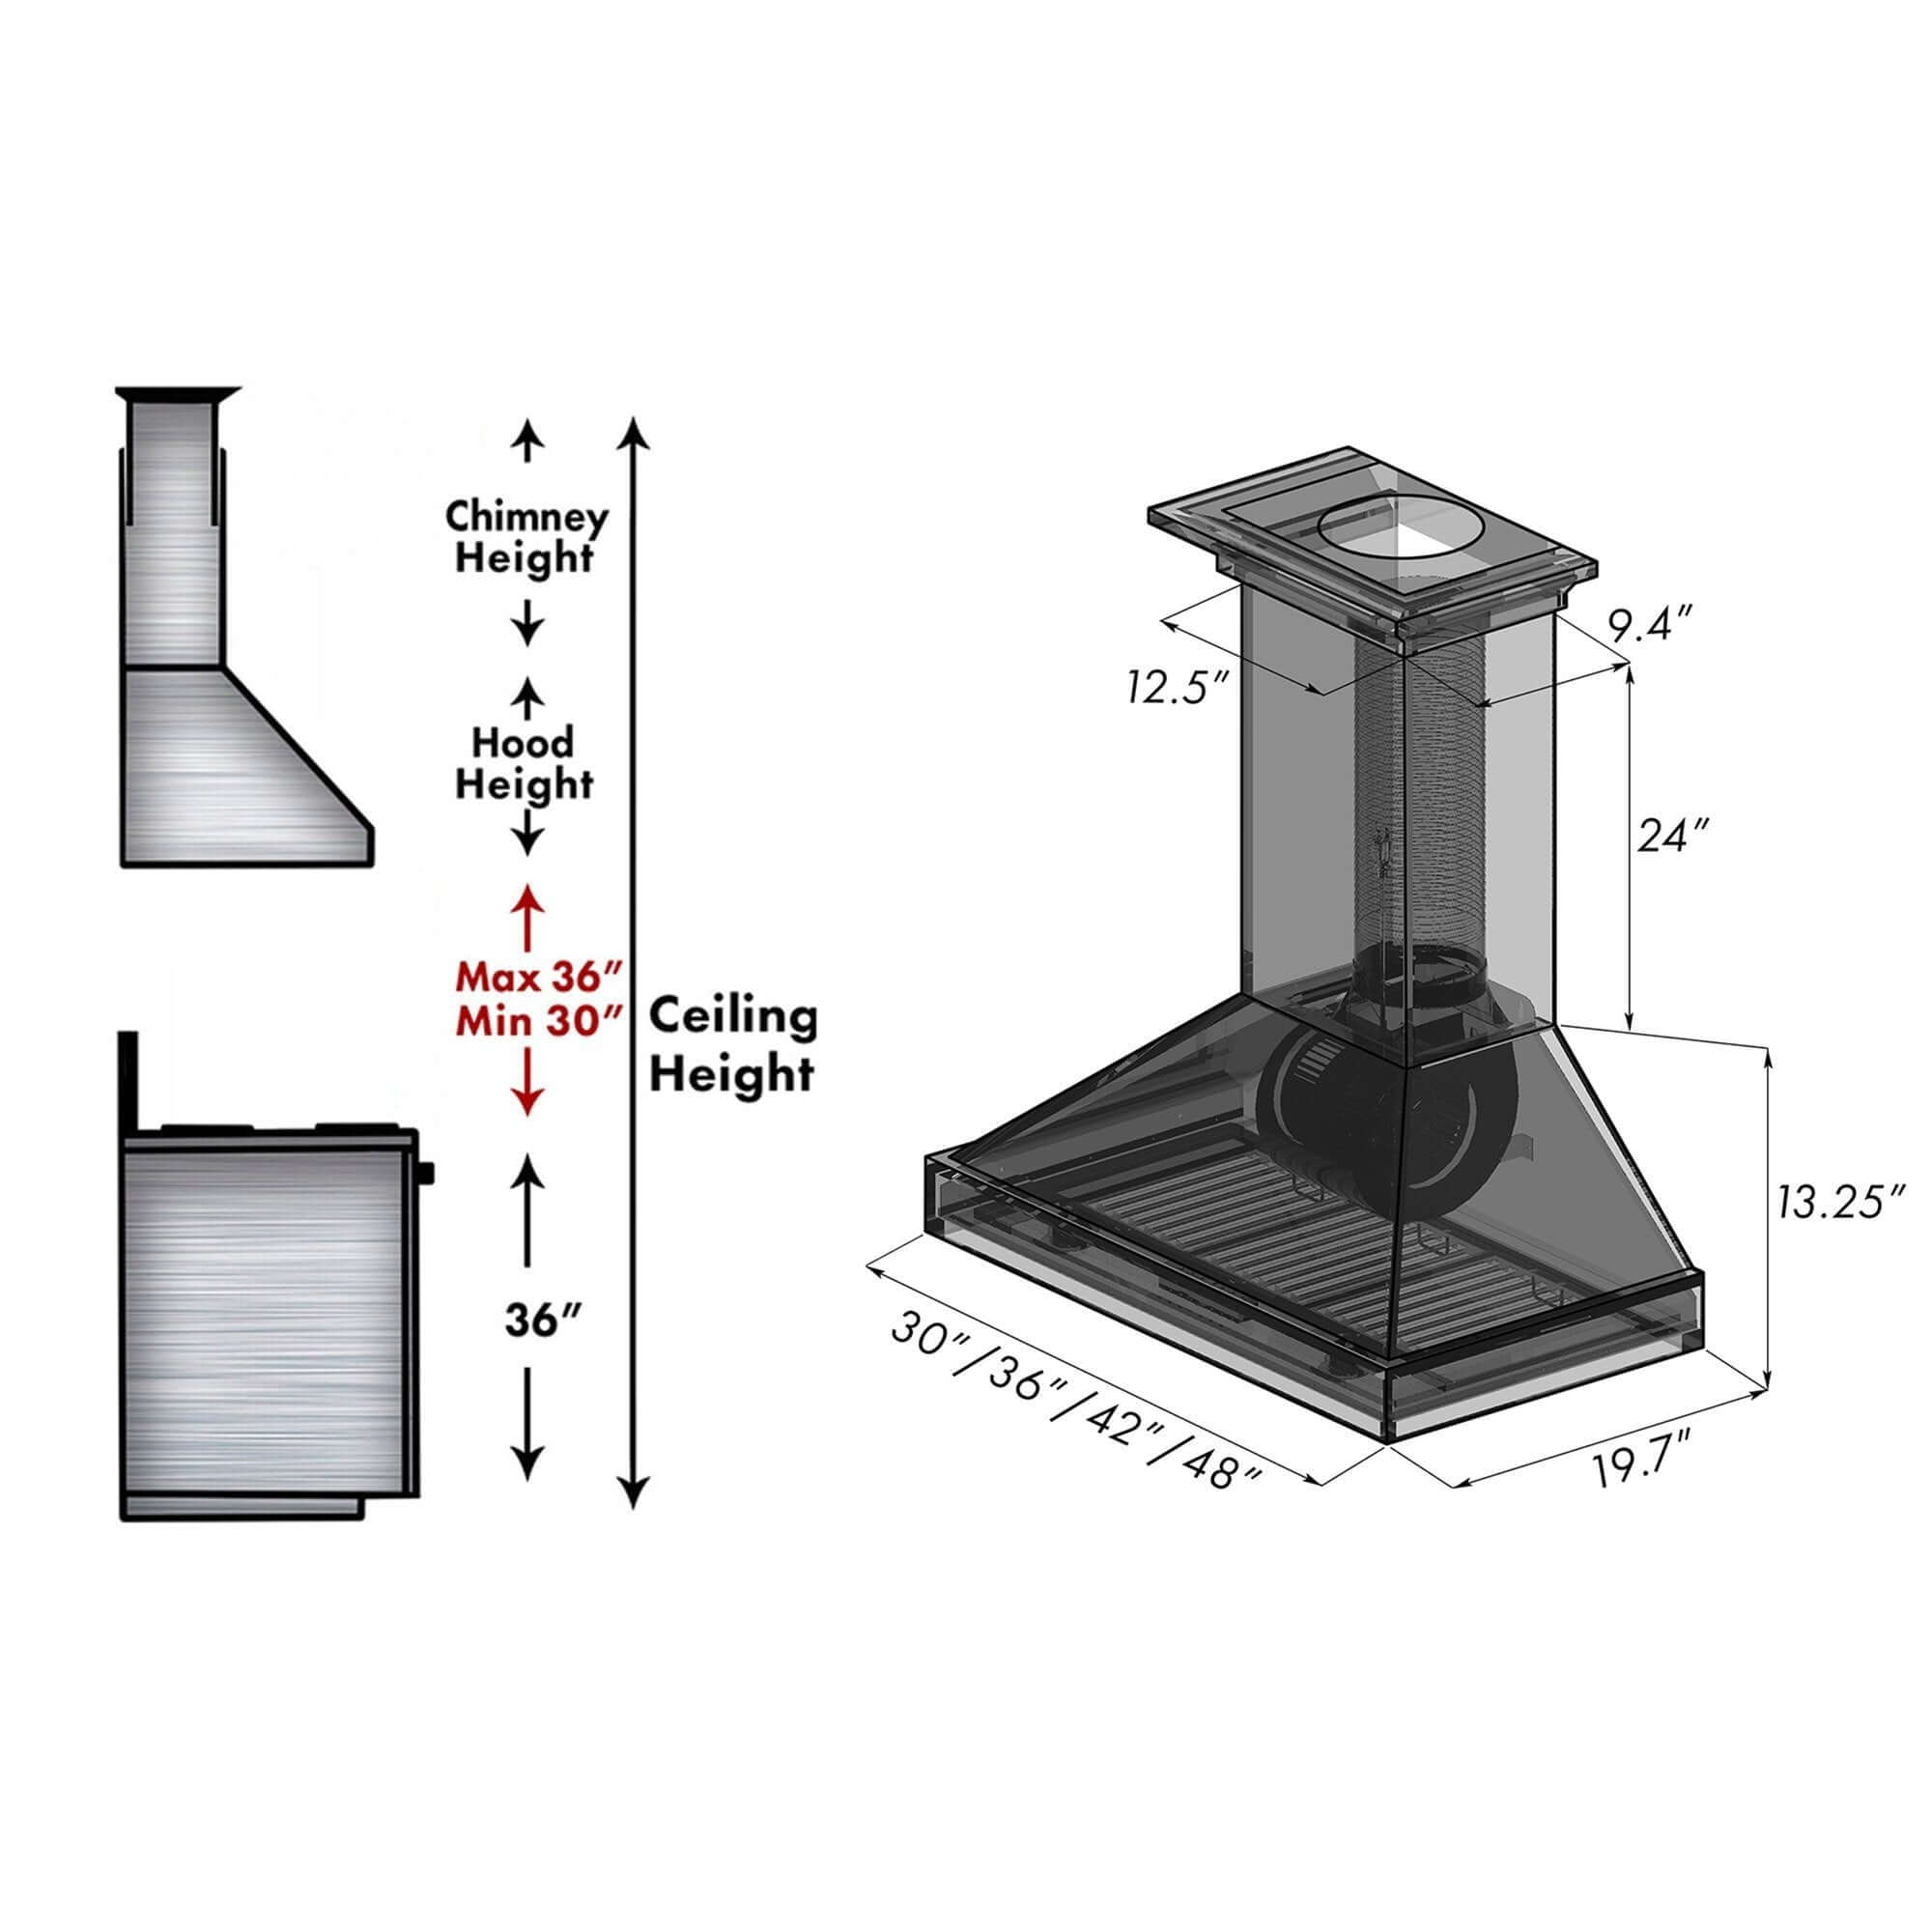 ZLINE 30 in. Convertible Vent Wooden Wall Mount Range Hood in Antigua and Walnut (KBAR-30) dimensional diagram with measurements.